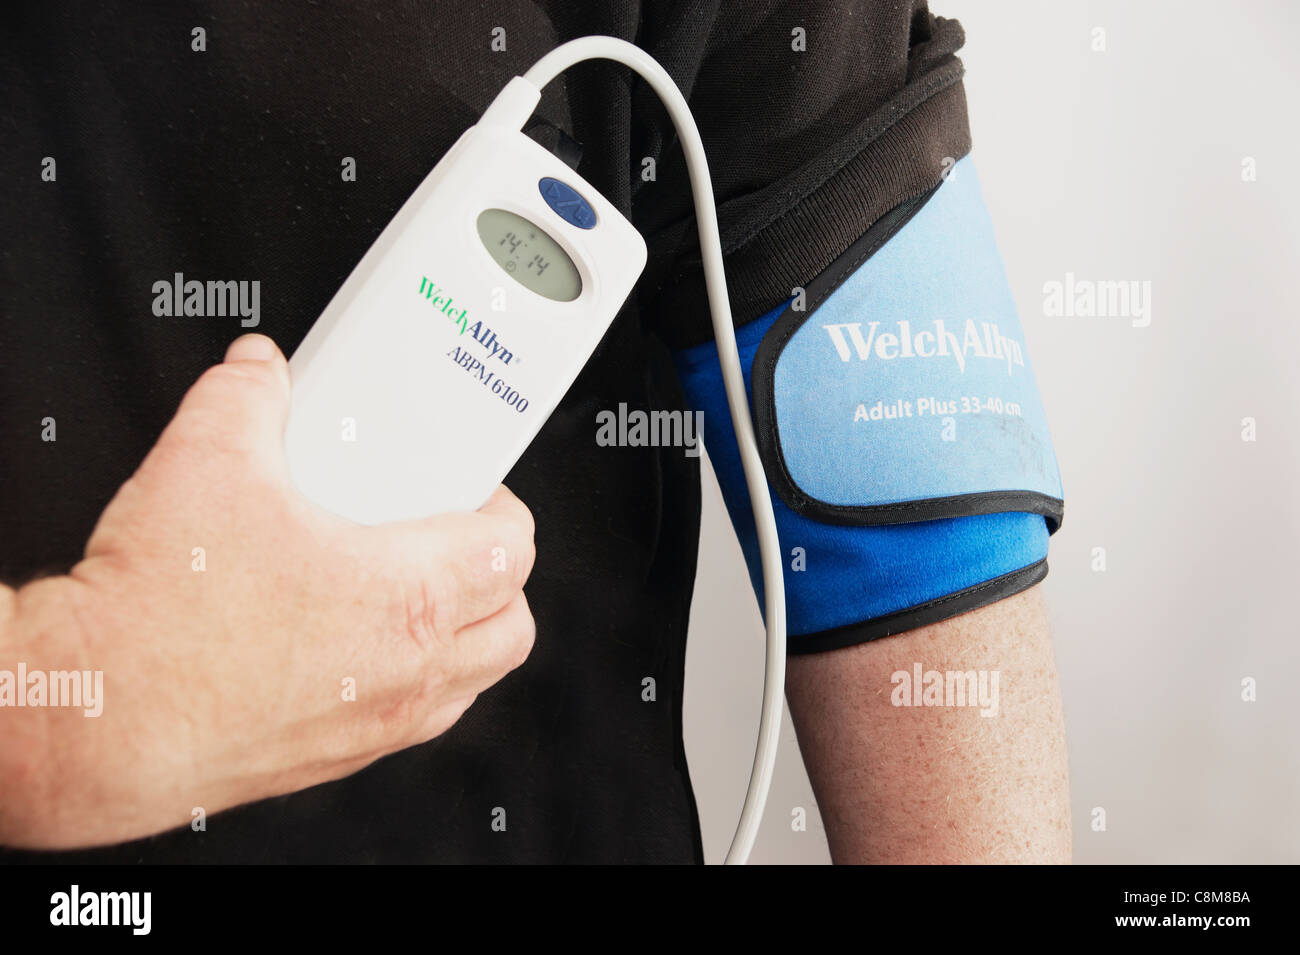 24 hour blood pressure monitoring - Stock Image - C016/6957